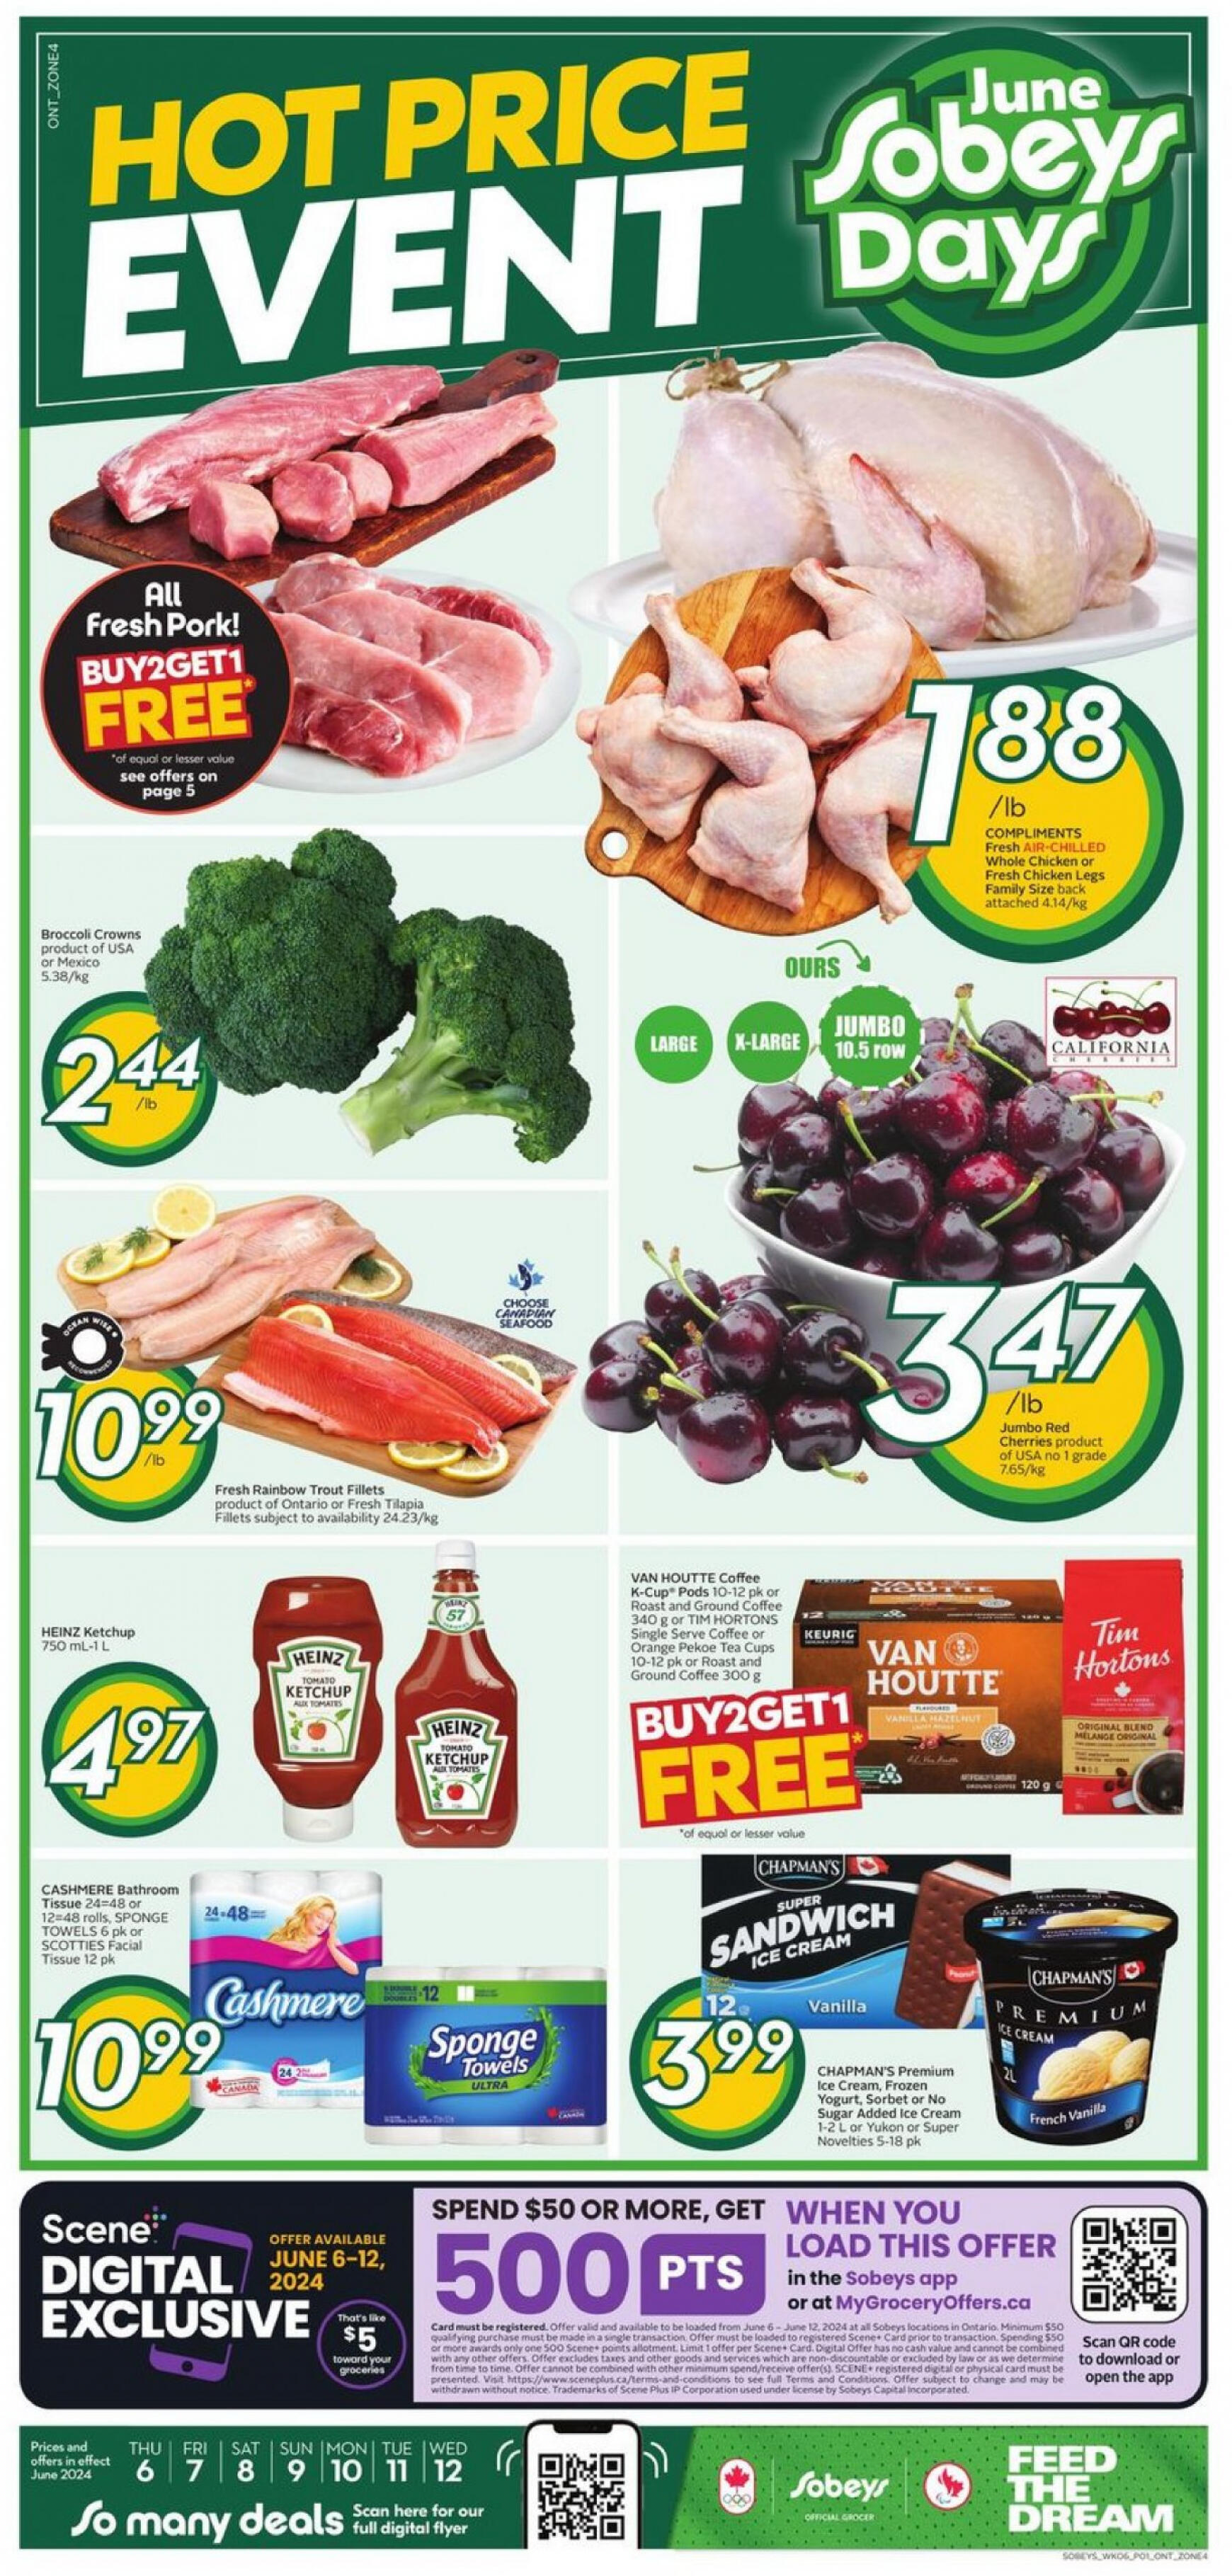 sobeys - Sobeys - Weekly Flyer - Ontario flyer current 06.06. - 12.06. - page: 1